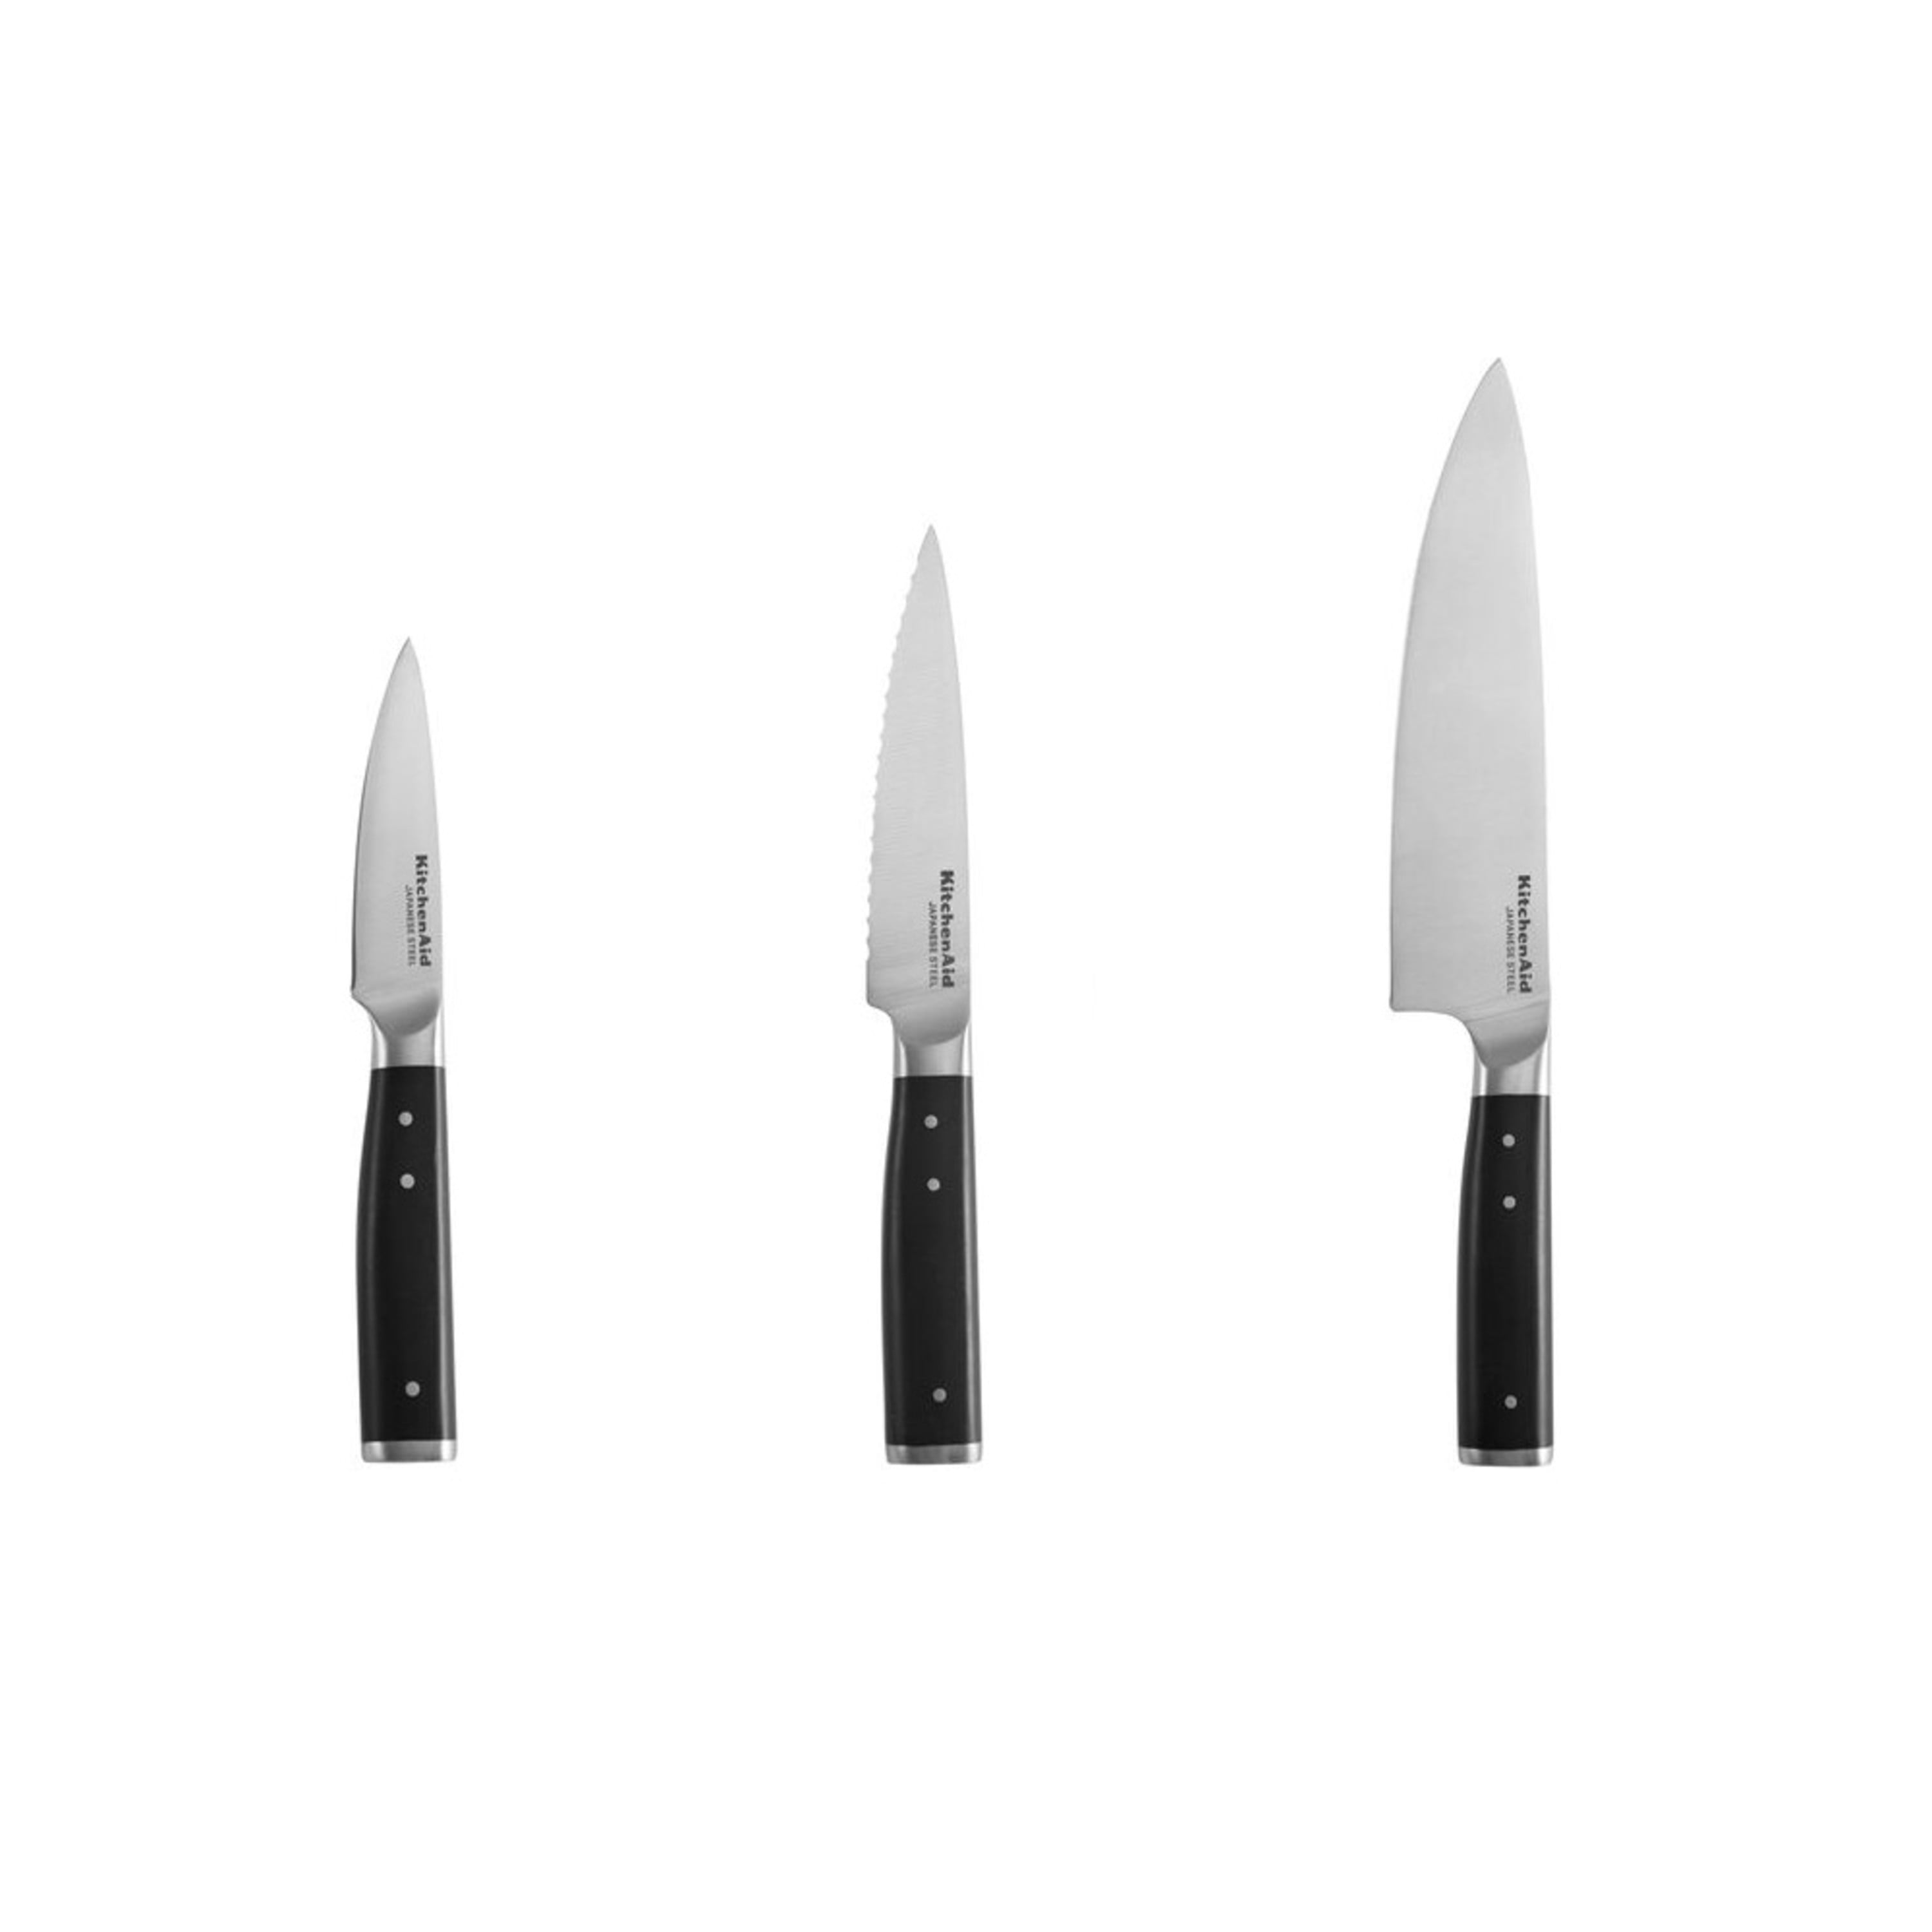 Kitchenaid Gourmet 3-piece Forged Tripe-Riveted Knife Set with Blade Covers, Black - Walmart.com